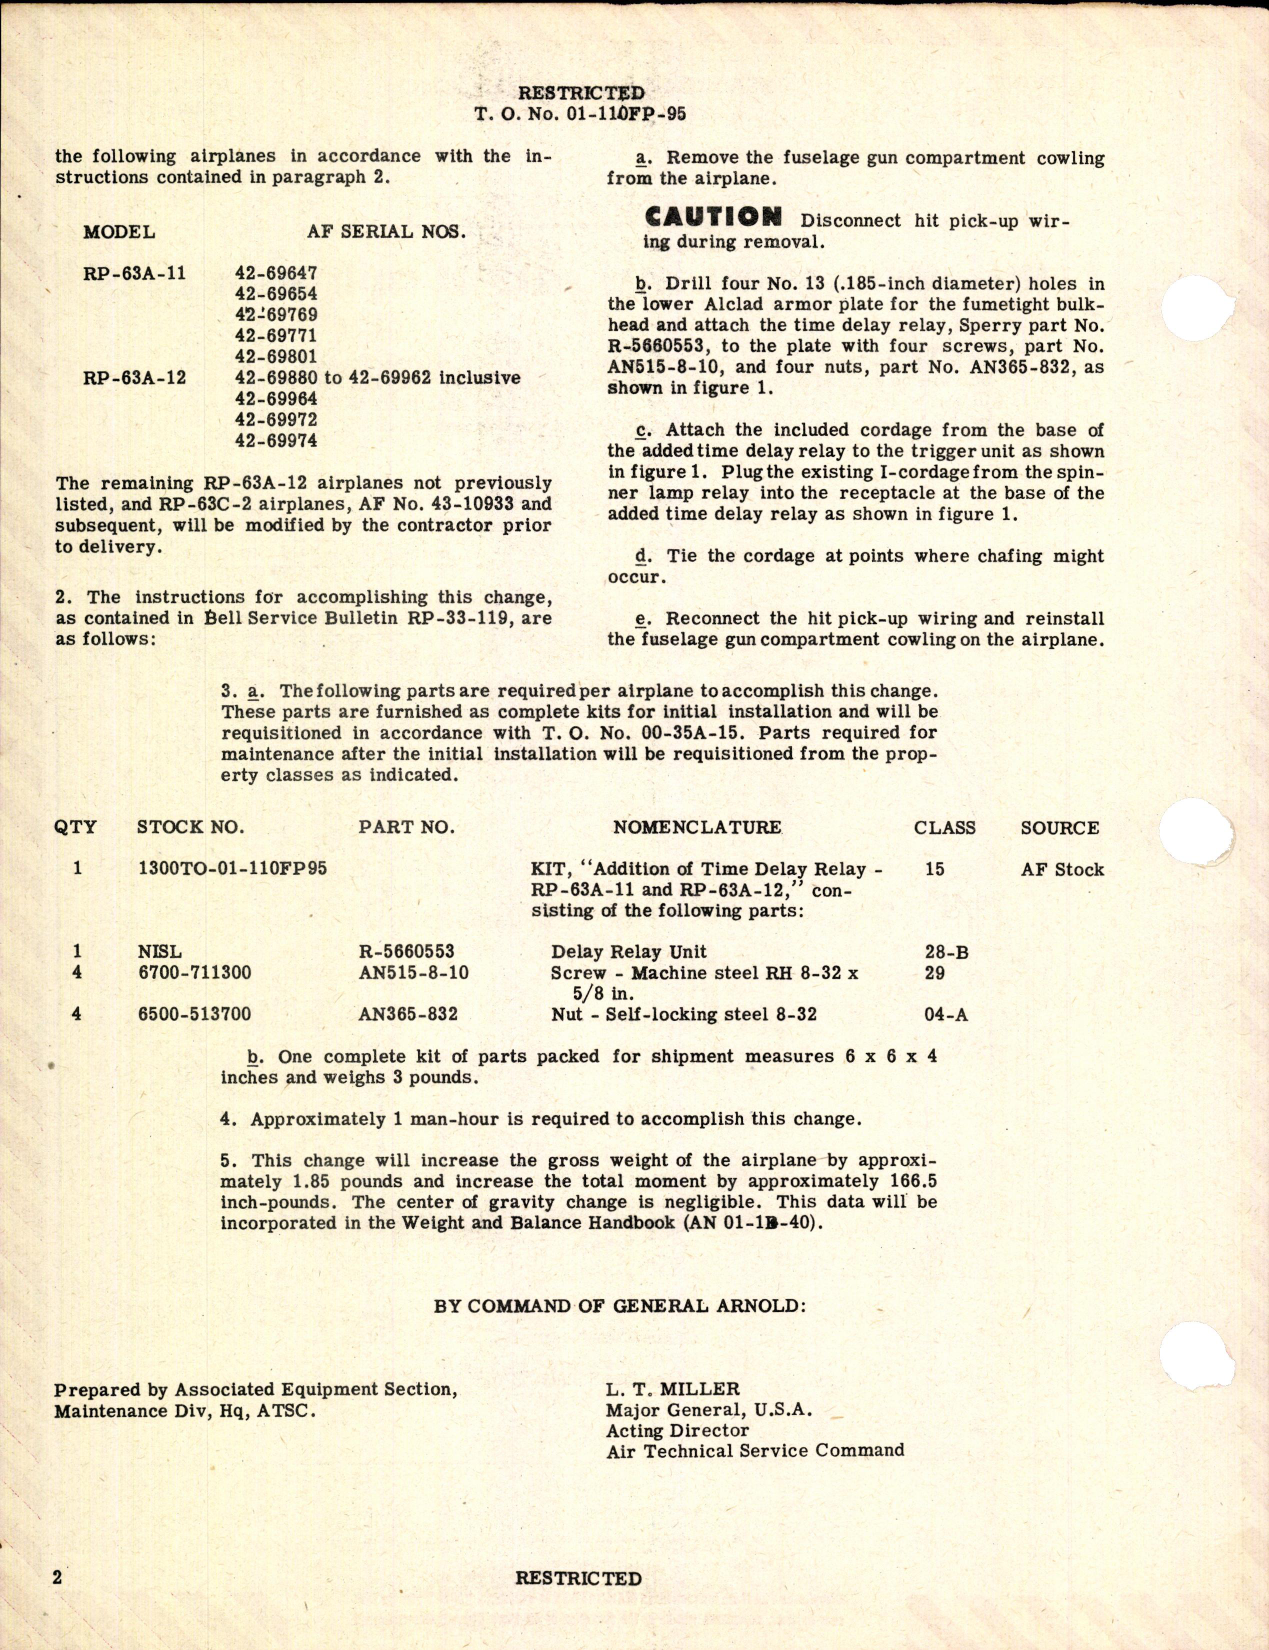 Sample page 2 from AirCorps Library document: Addition of Time Delay Relay for RP-63A